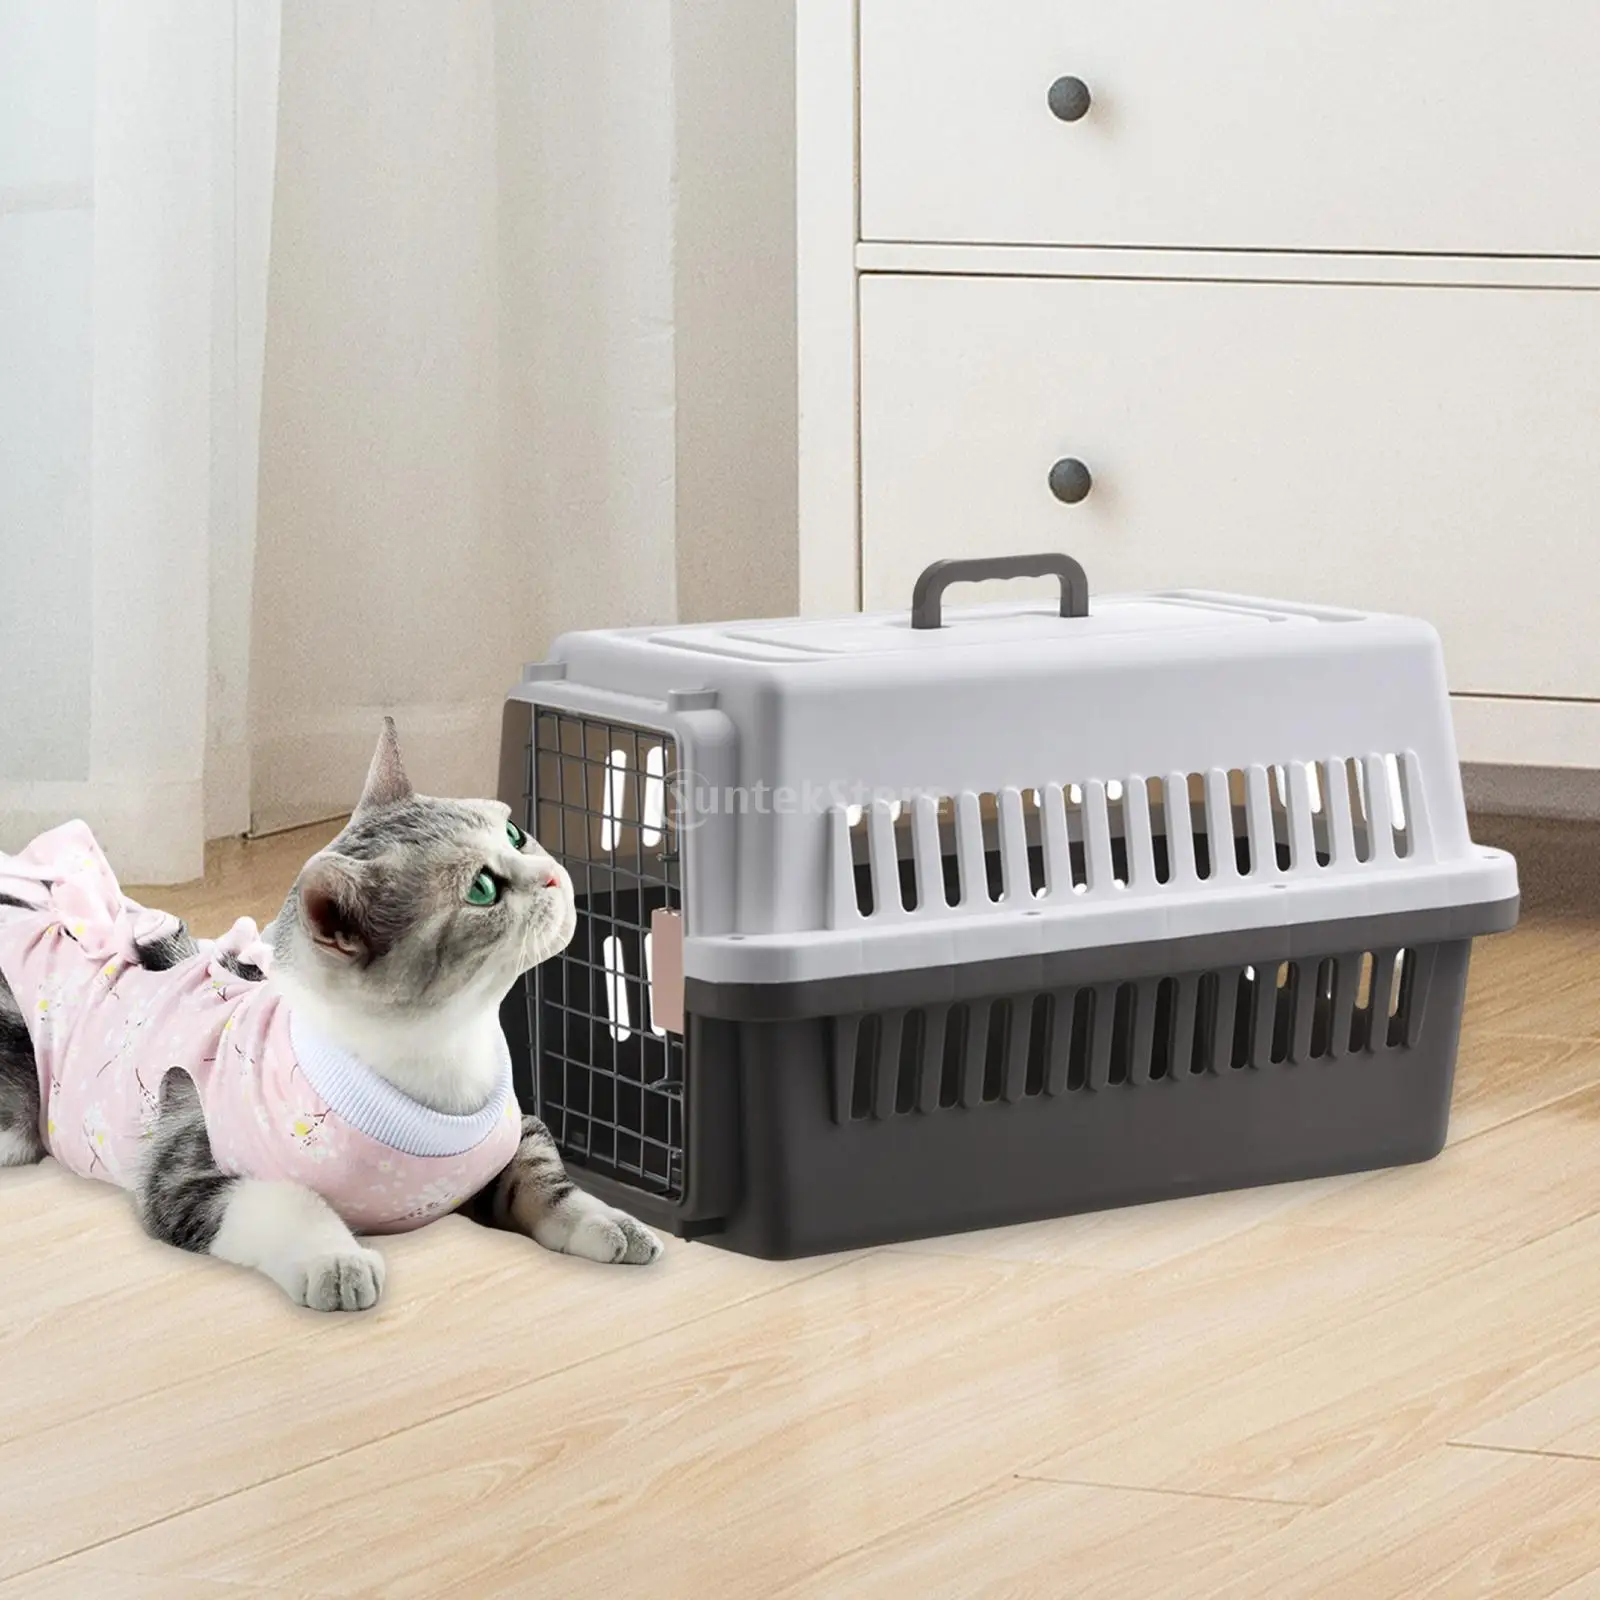 Pet Air Transport Box Cat Dog Travel Kennel Hard Surface Car Travel Pet Carrier Item Suitable for Small Dogs and Cats images - 6